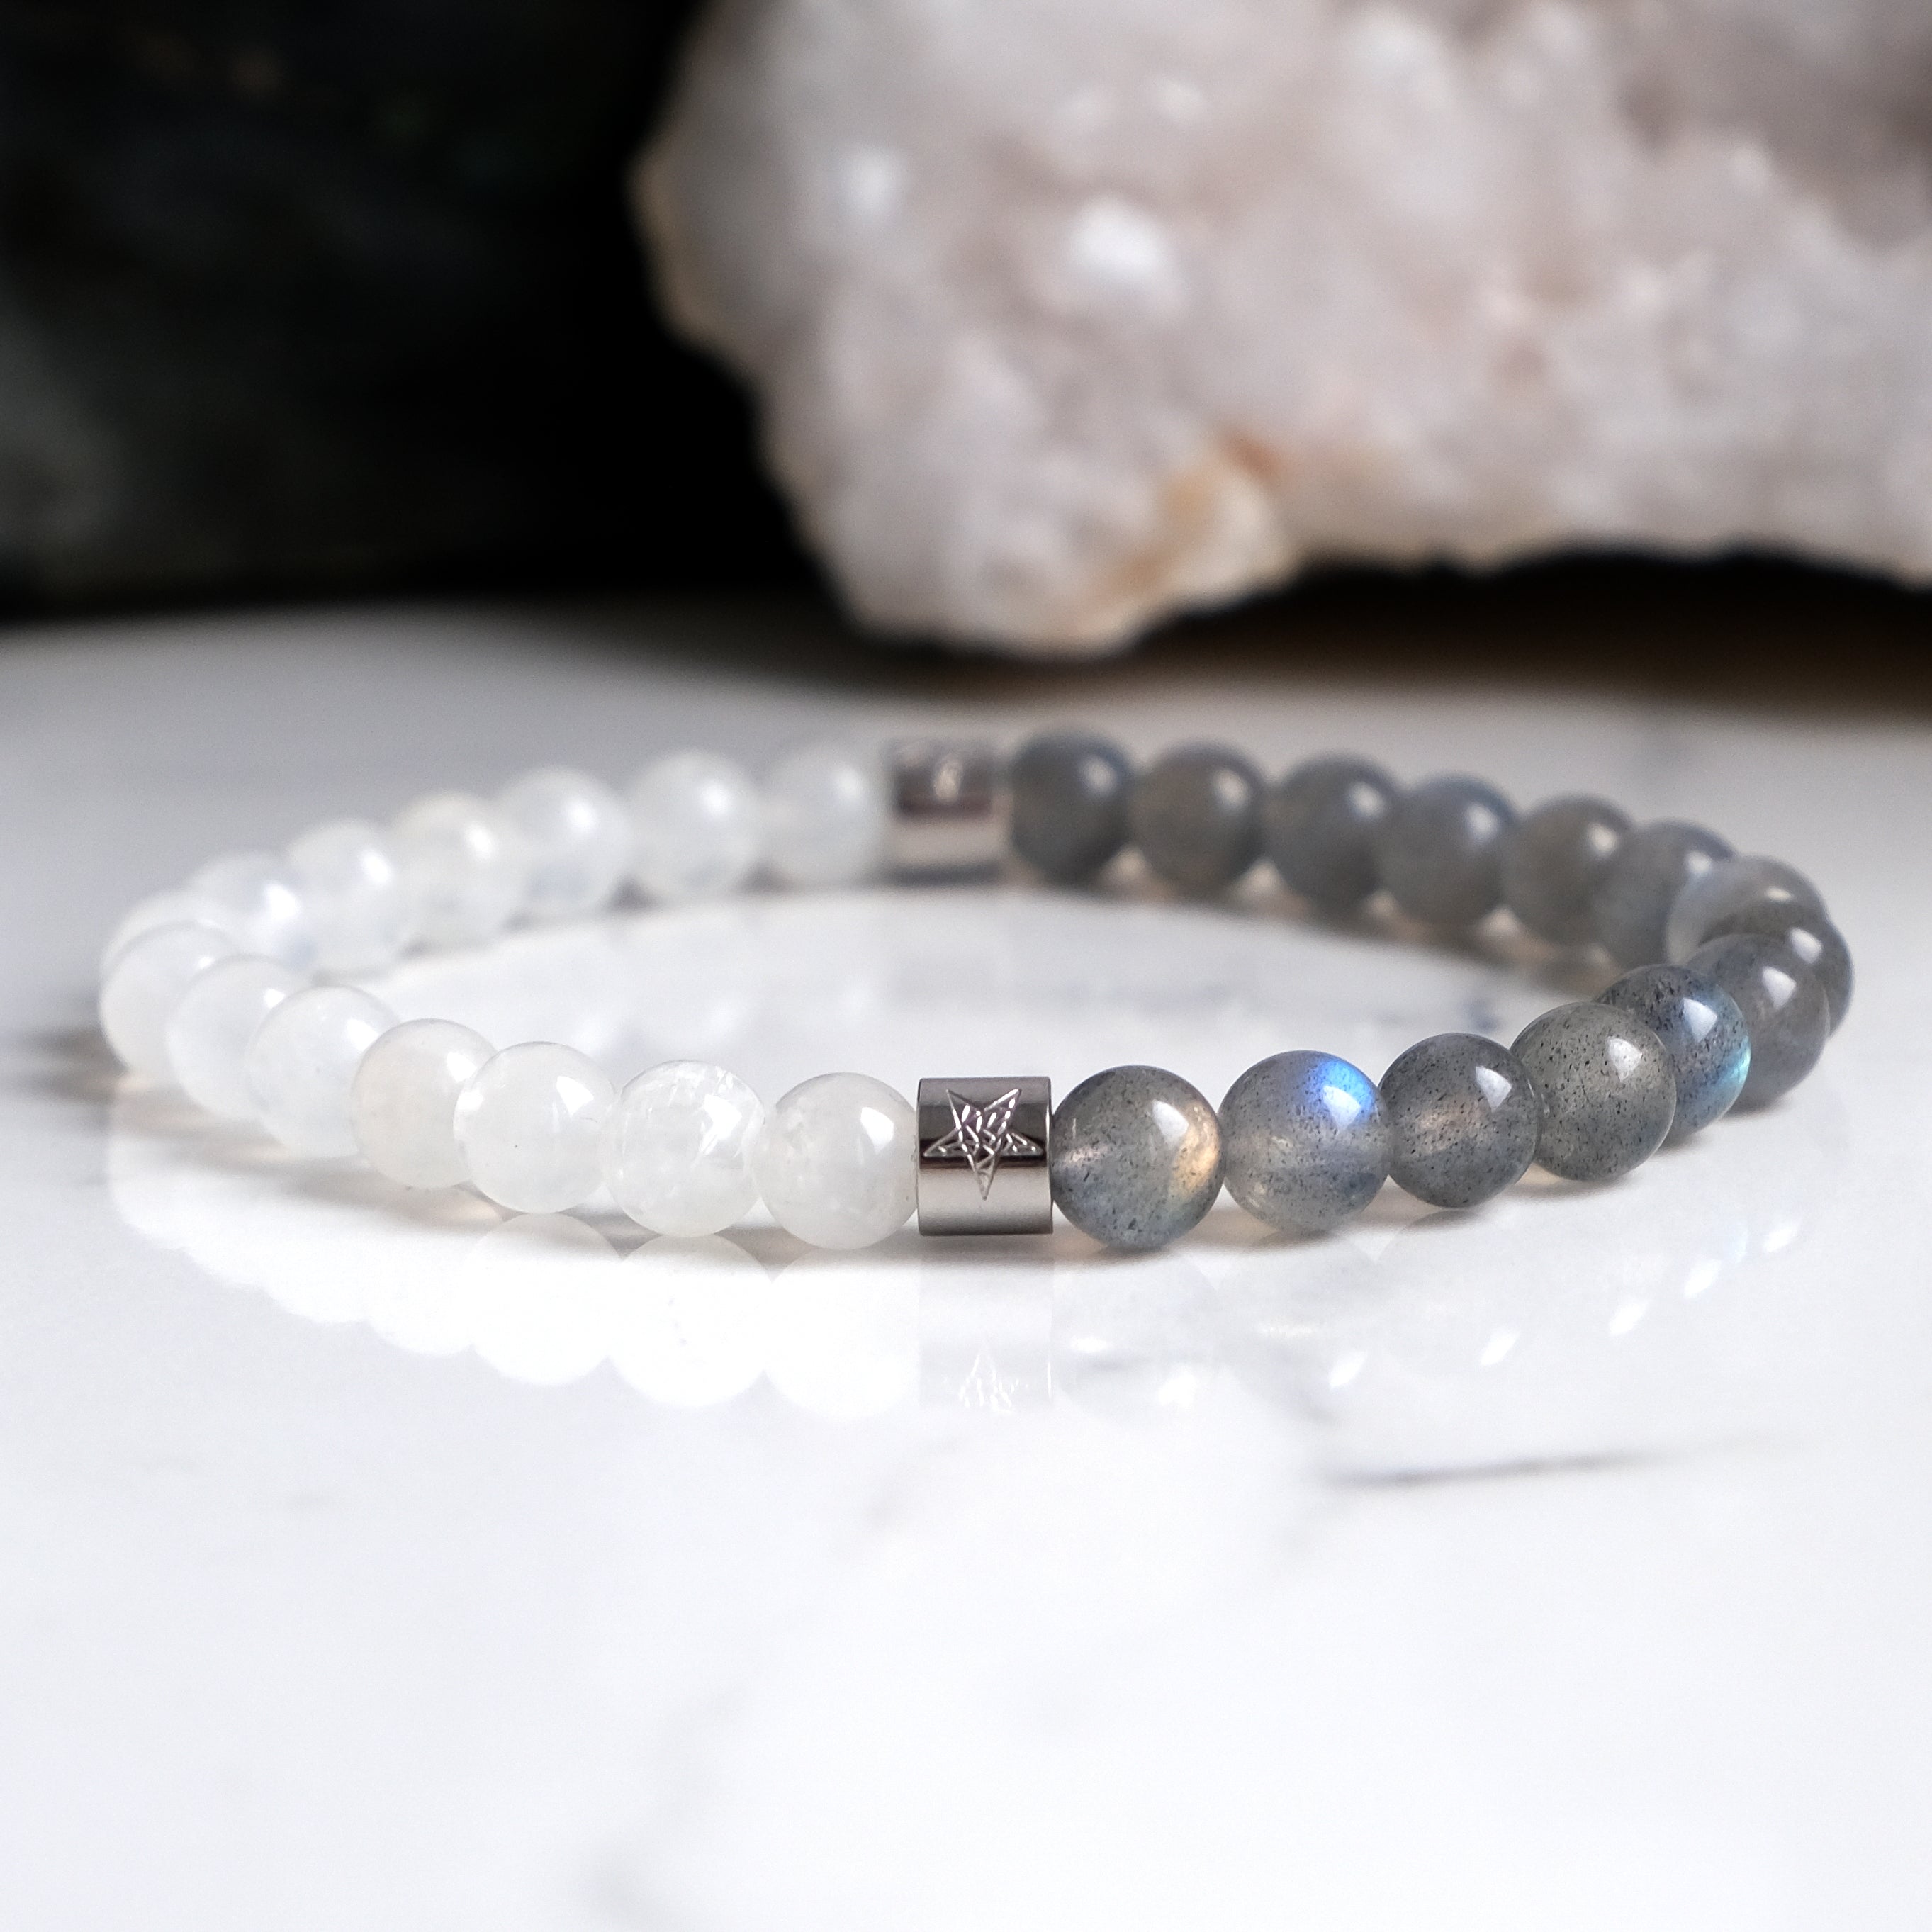 Labradorite and moonstone gemstone bracelet with stainless steel accessories